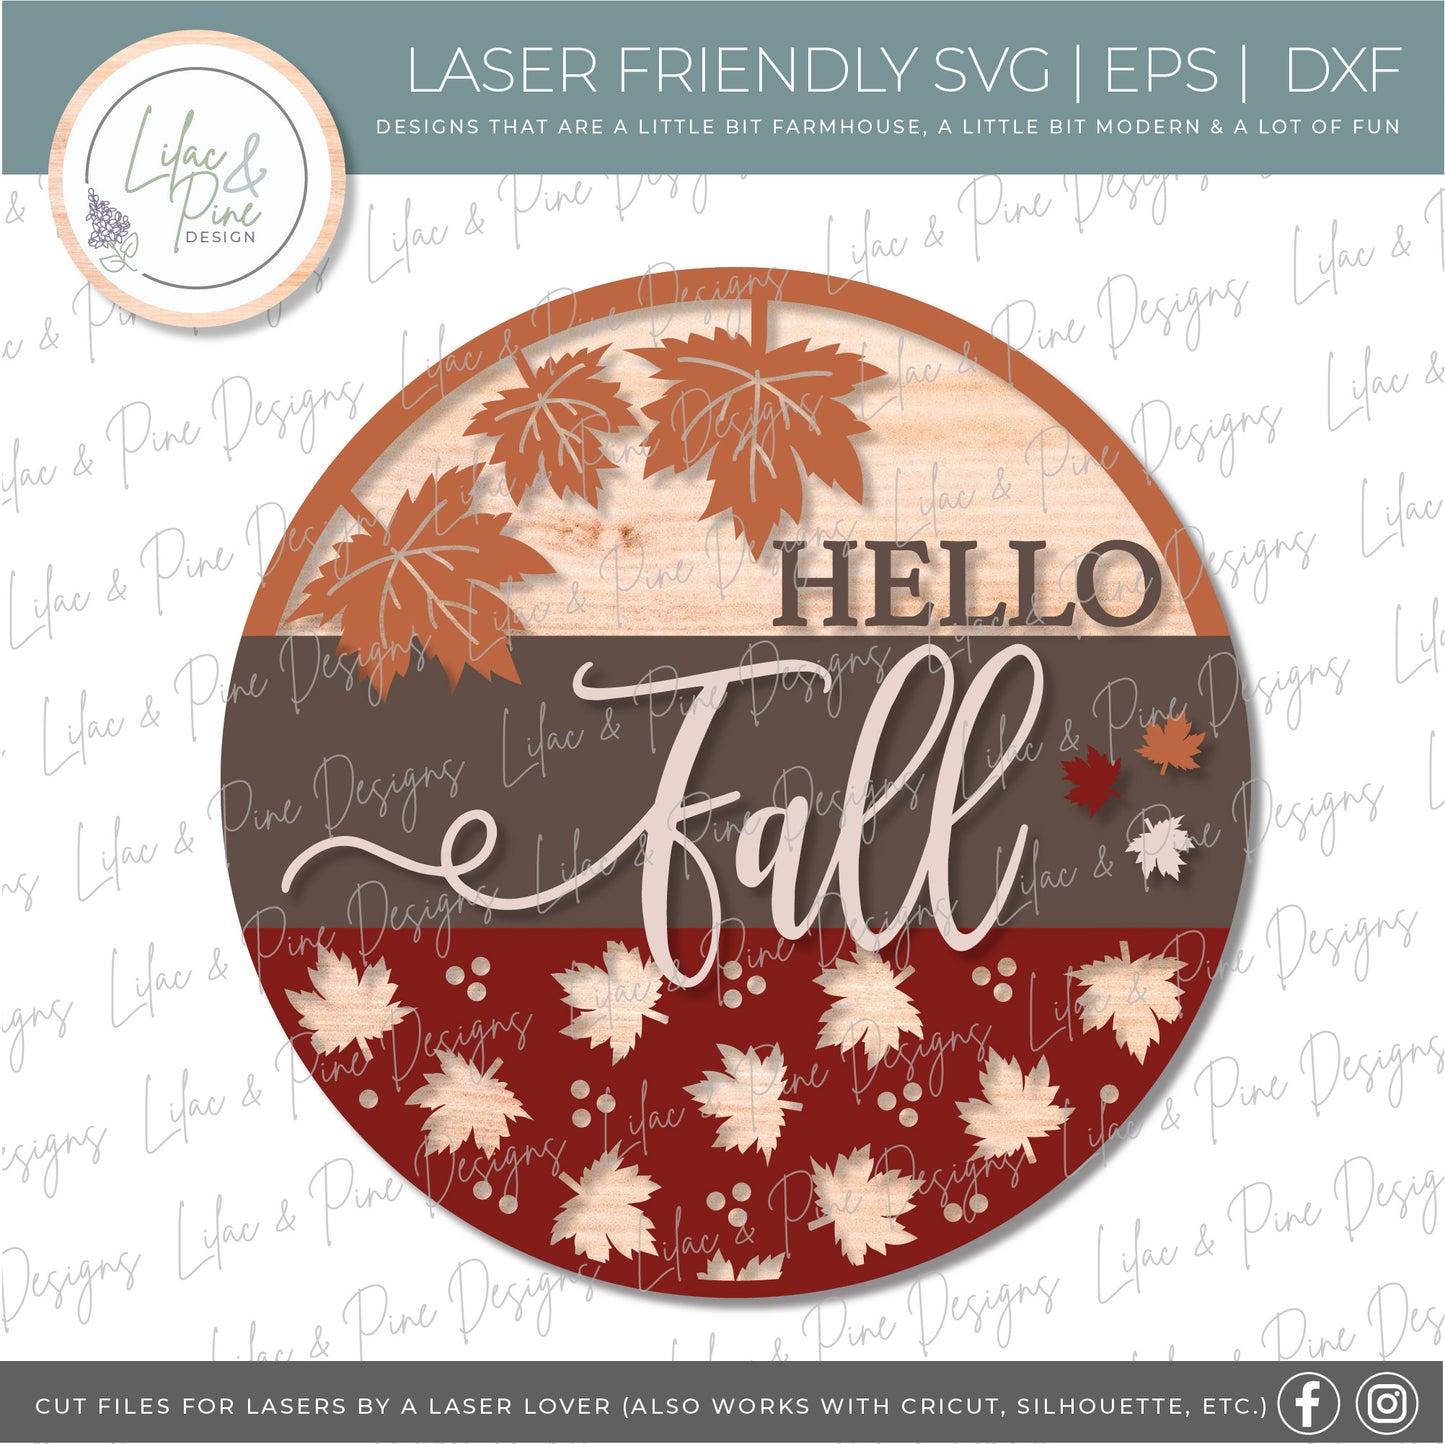 Hello Fall sign SVG, Fall door round SVG, Fall Welcome, Fall porch decor  SVG, fall leaves svg, maple leaves, Glowforge Svg, laser cut file